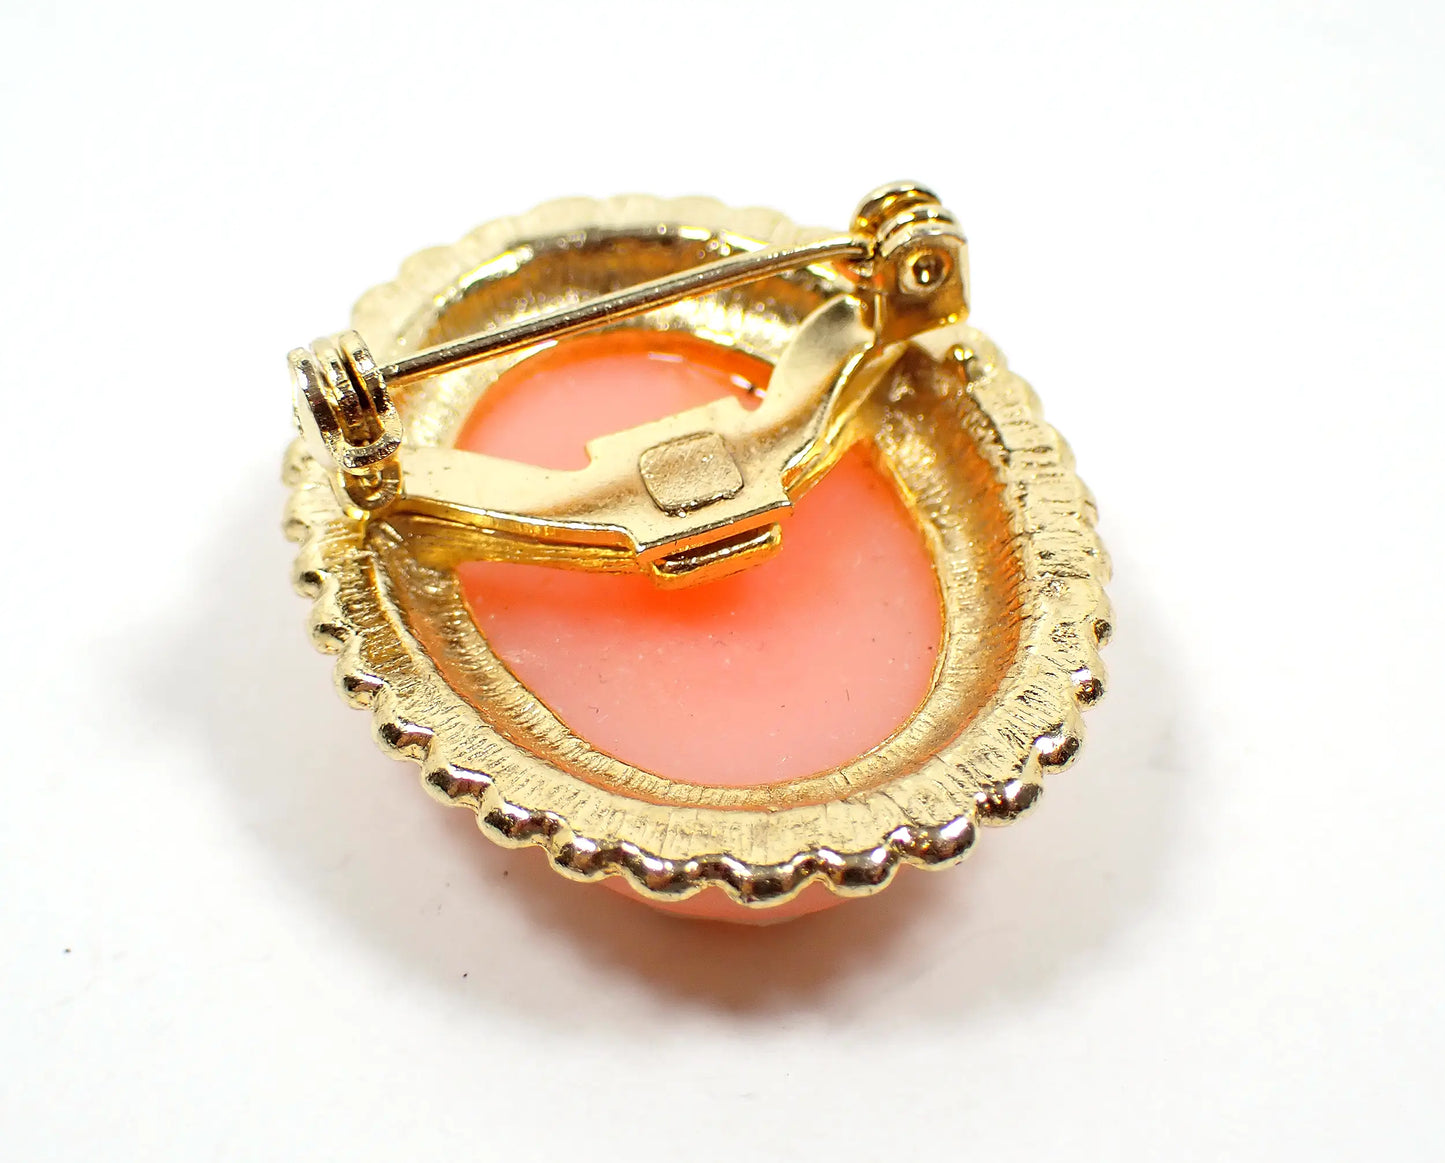 Molded Plastic Vintage Girl Cameo Brooch Pin, Gold Tone, Retro 1980s